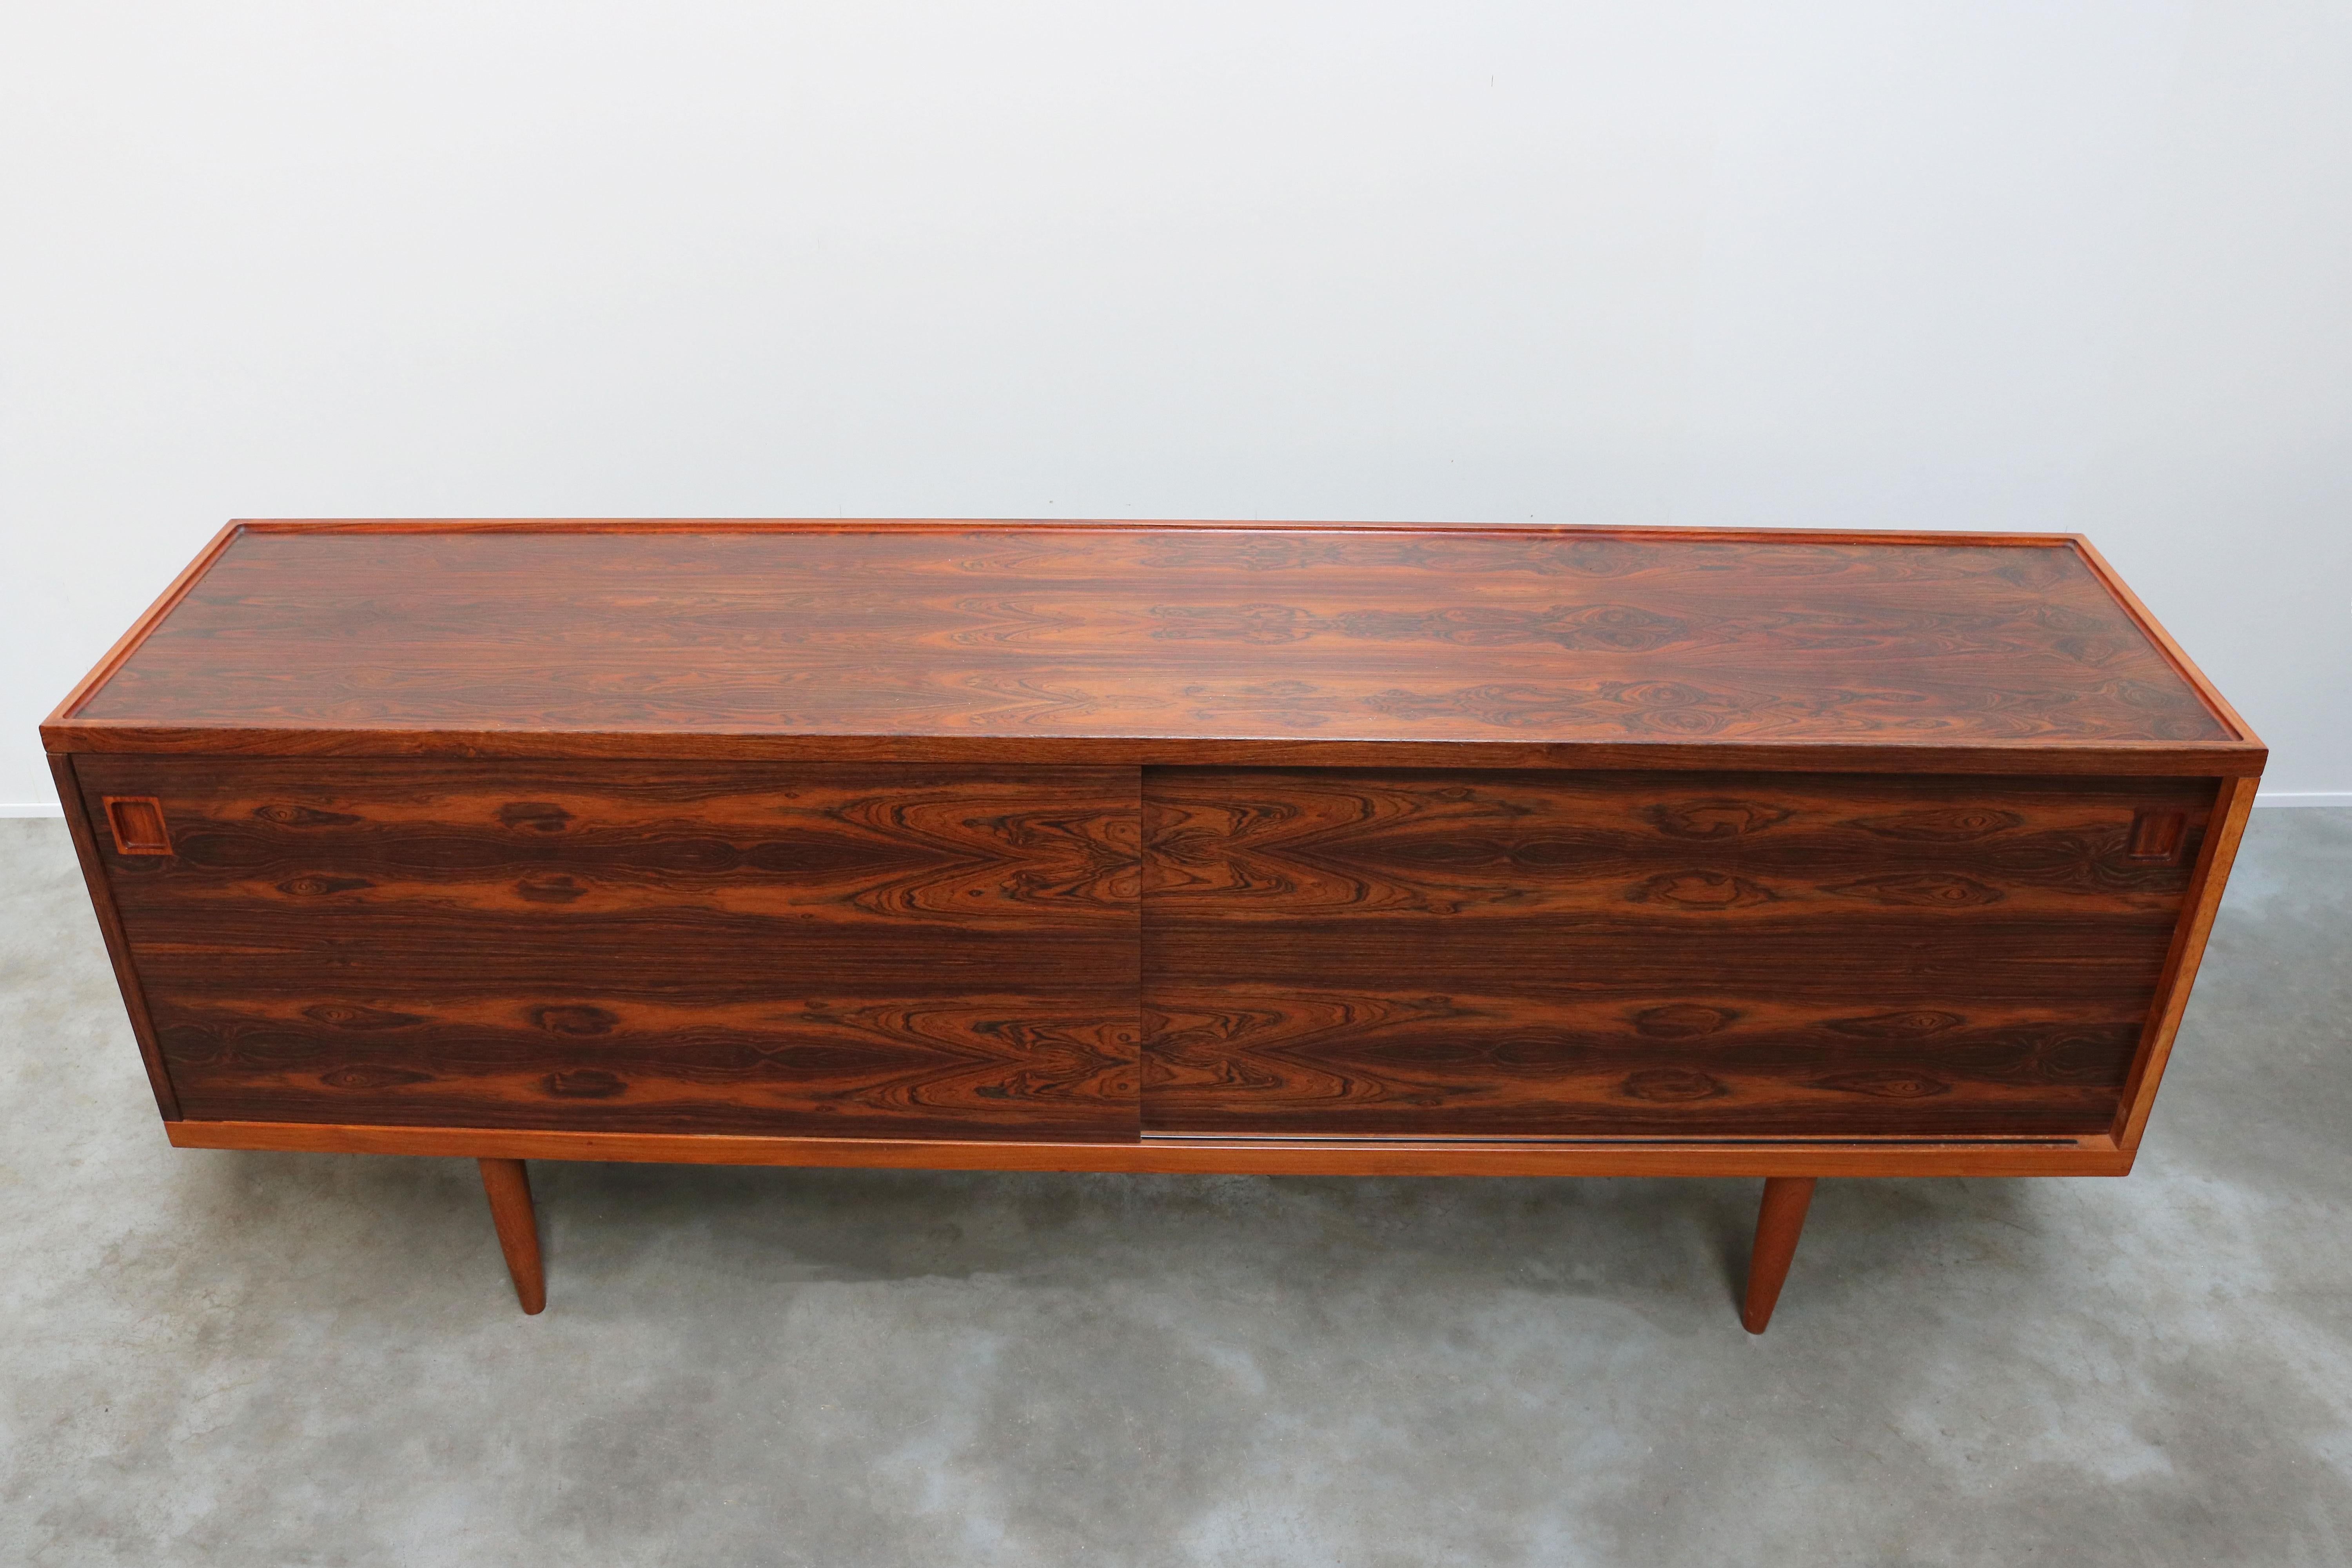 Rare Danish Credenza / Sideboard Model 20 by Niels Otto Moller 1950 Rosewood For Sale 4